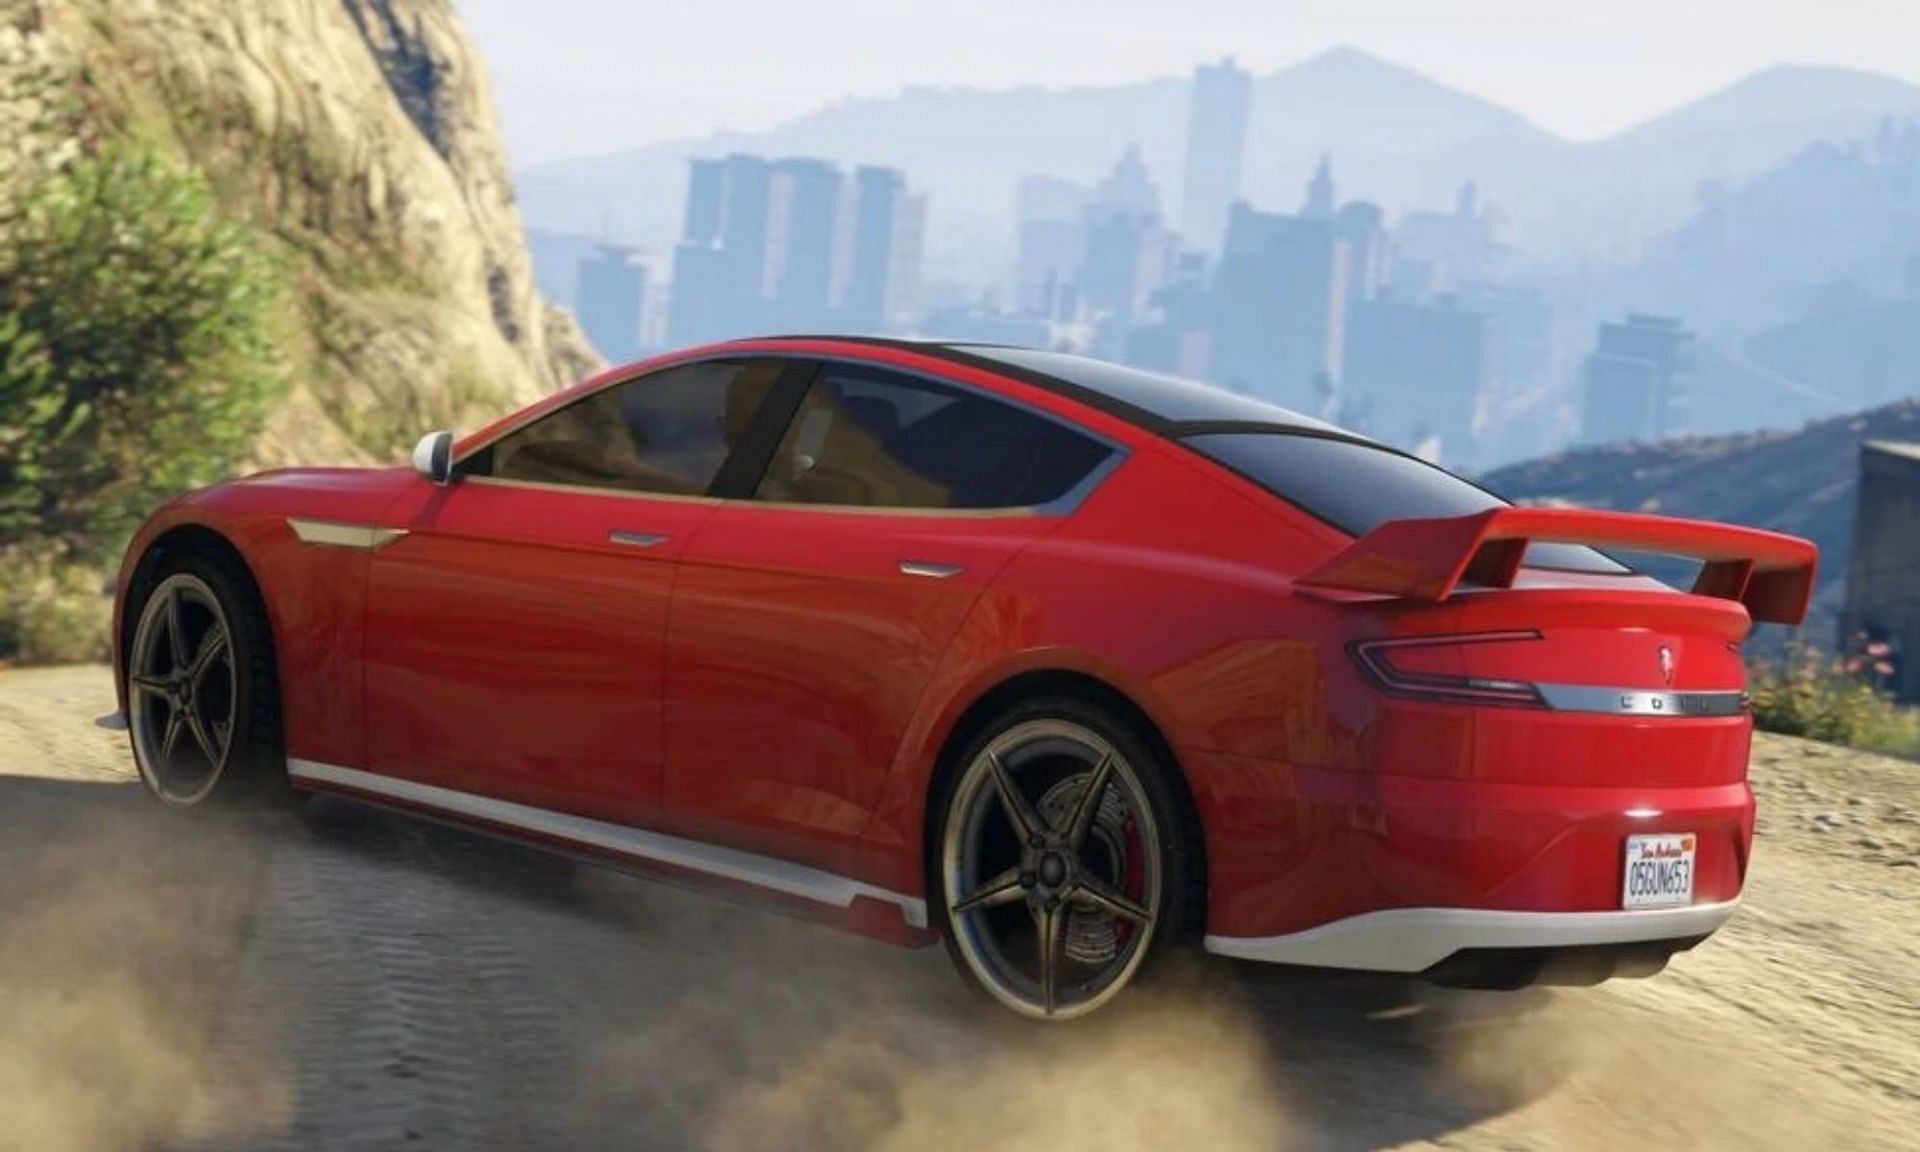 This is one of the few electric cars in GTA Online (Image via Rockstar Games)